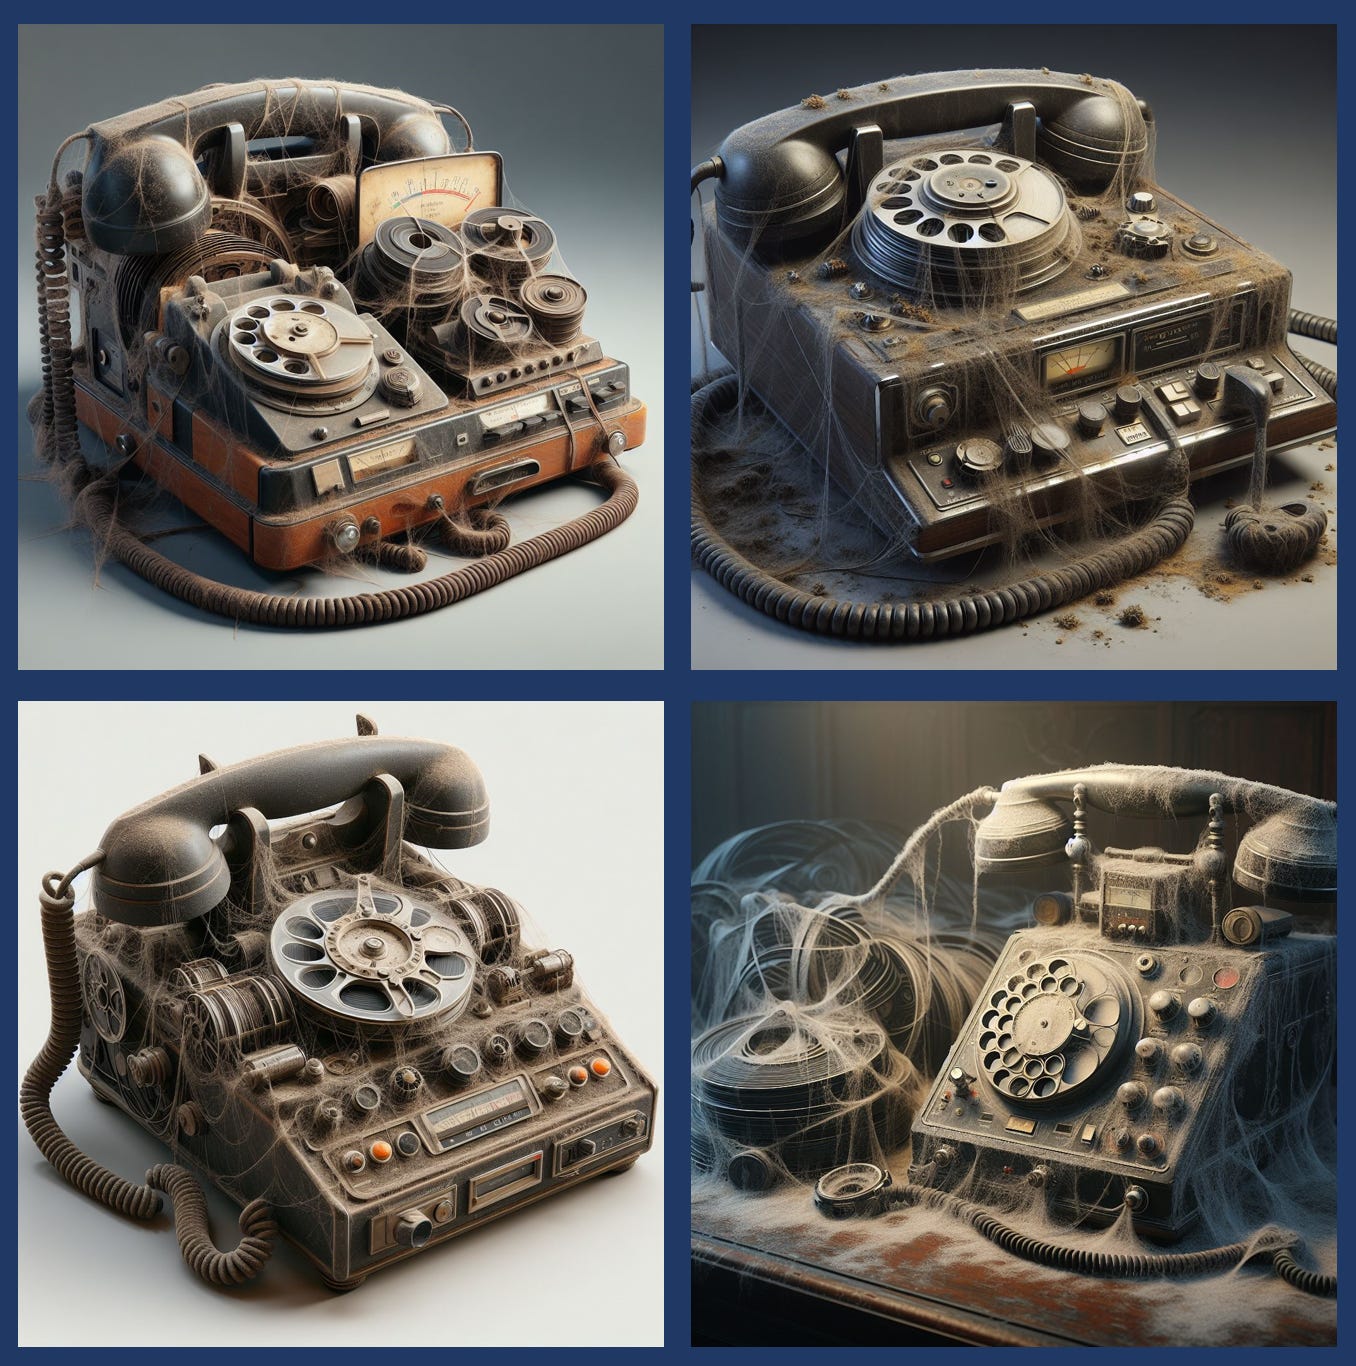 A set of four images of fantastically complicated antique phones built into recording devices and covered in cobwebs and dust created by DALL-E through Bing Copilot.